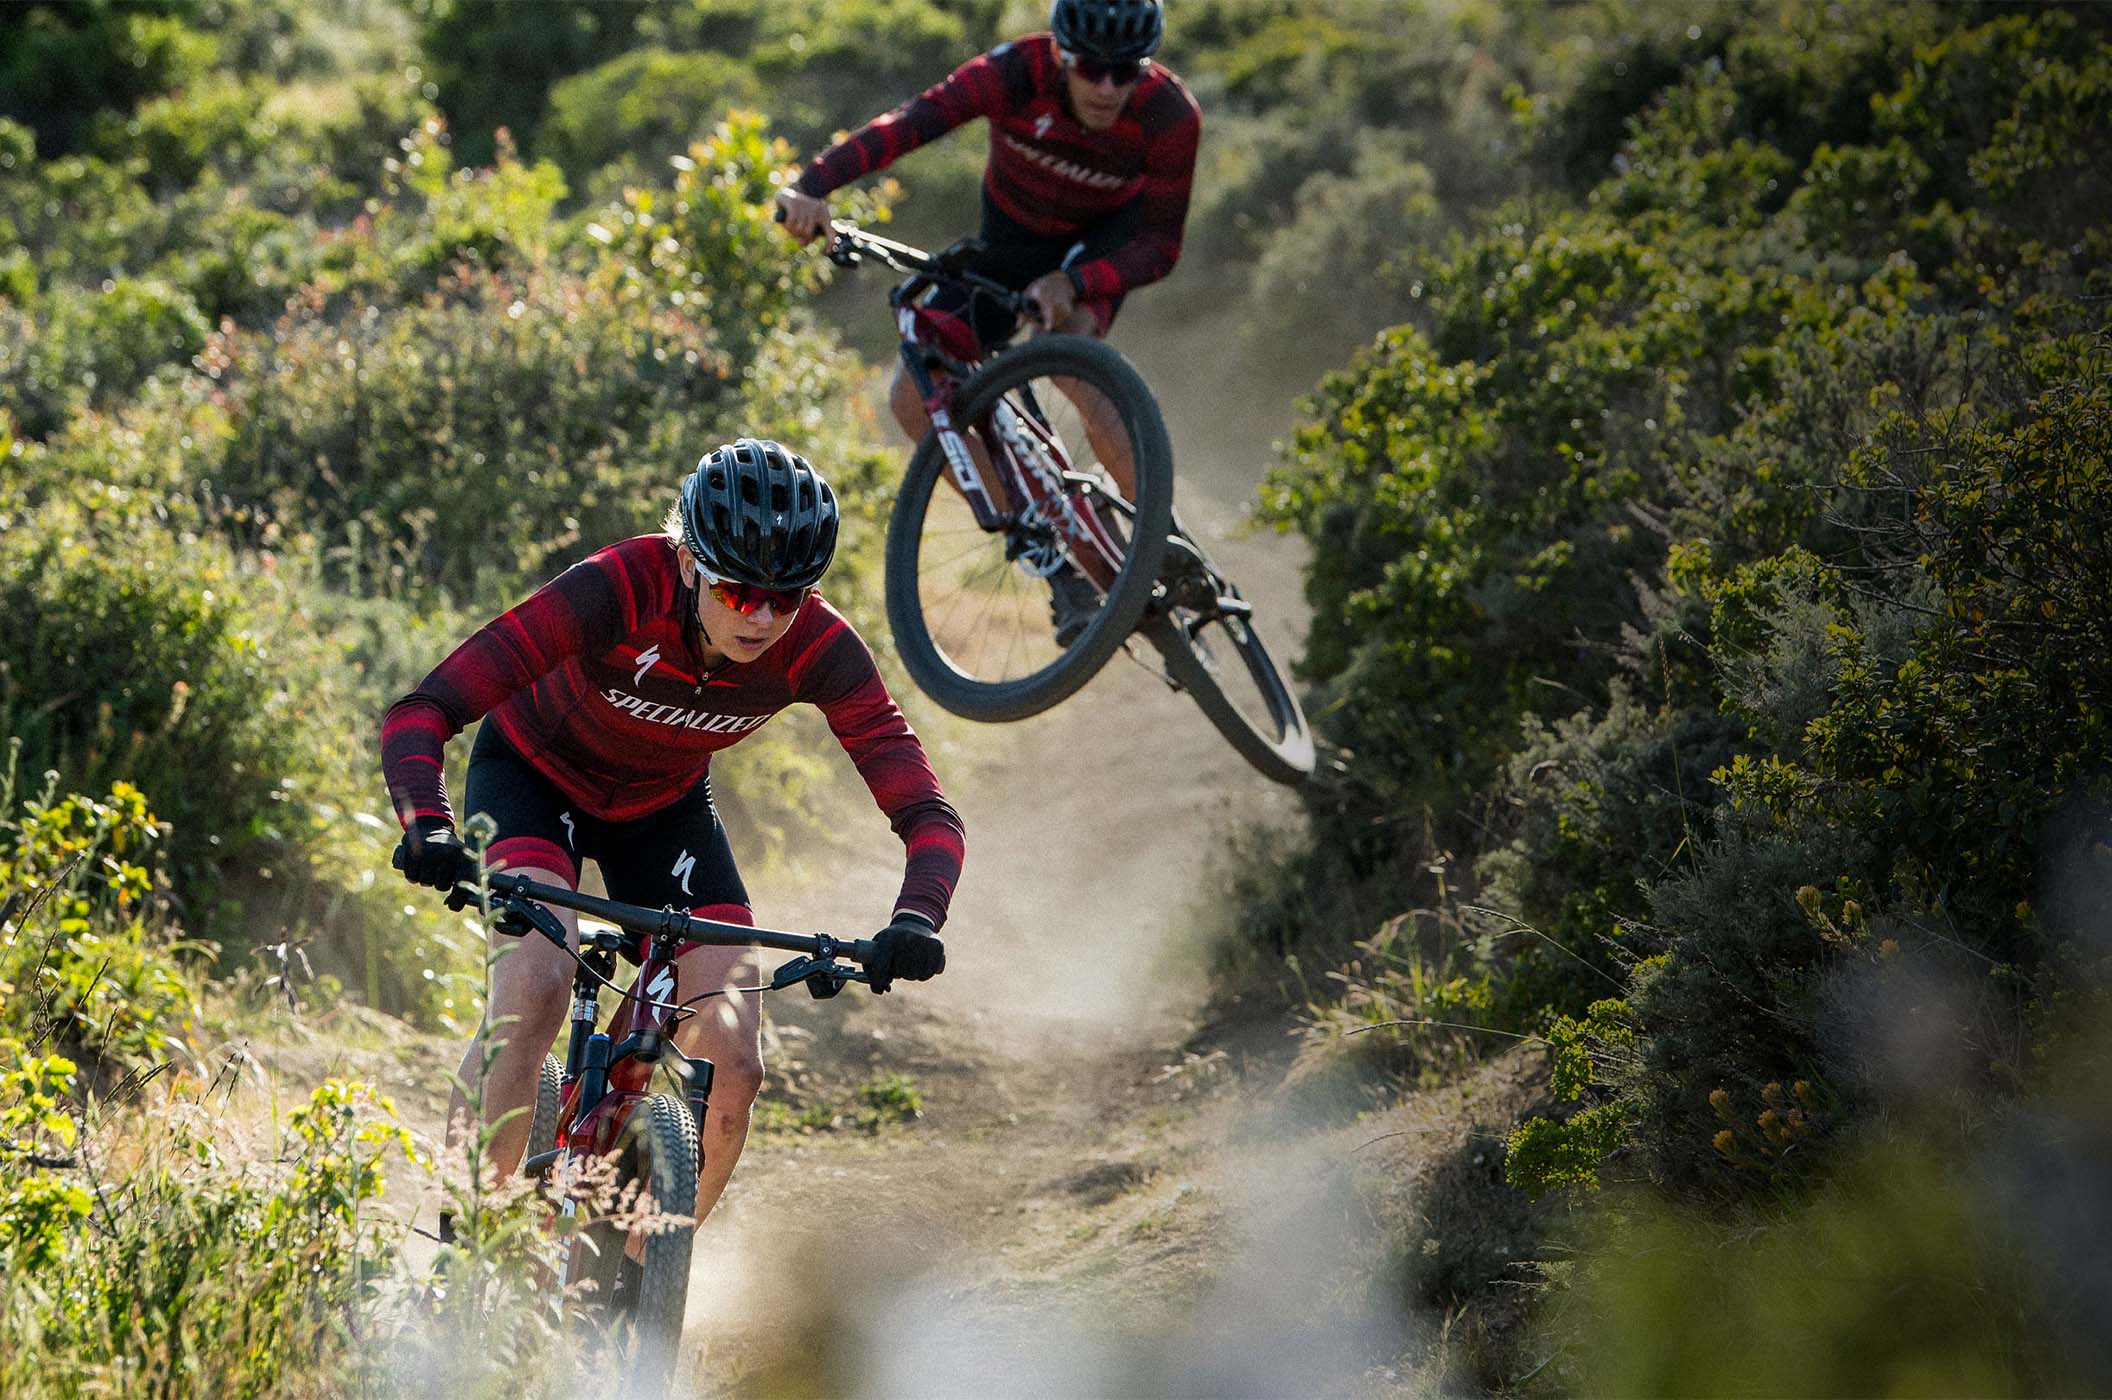 Specialized MTB – We love Riding